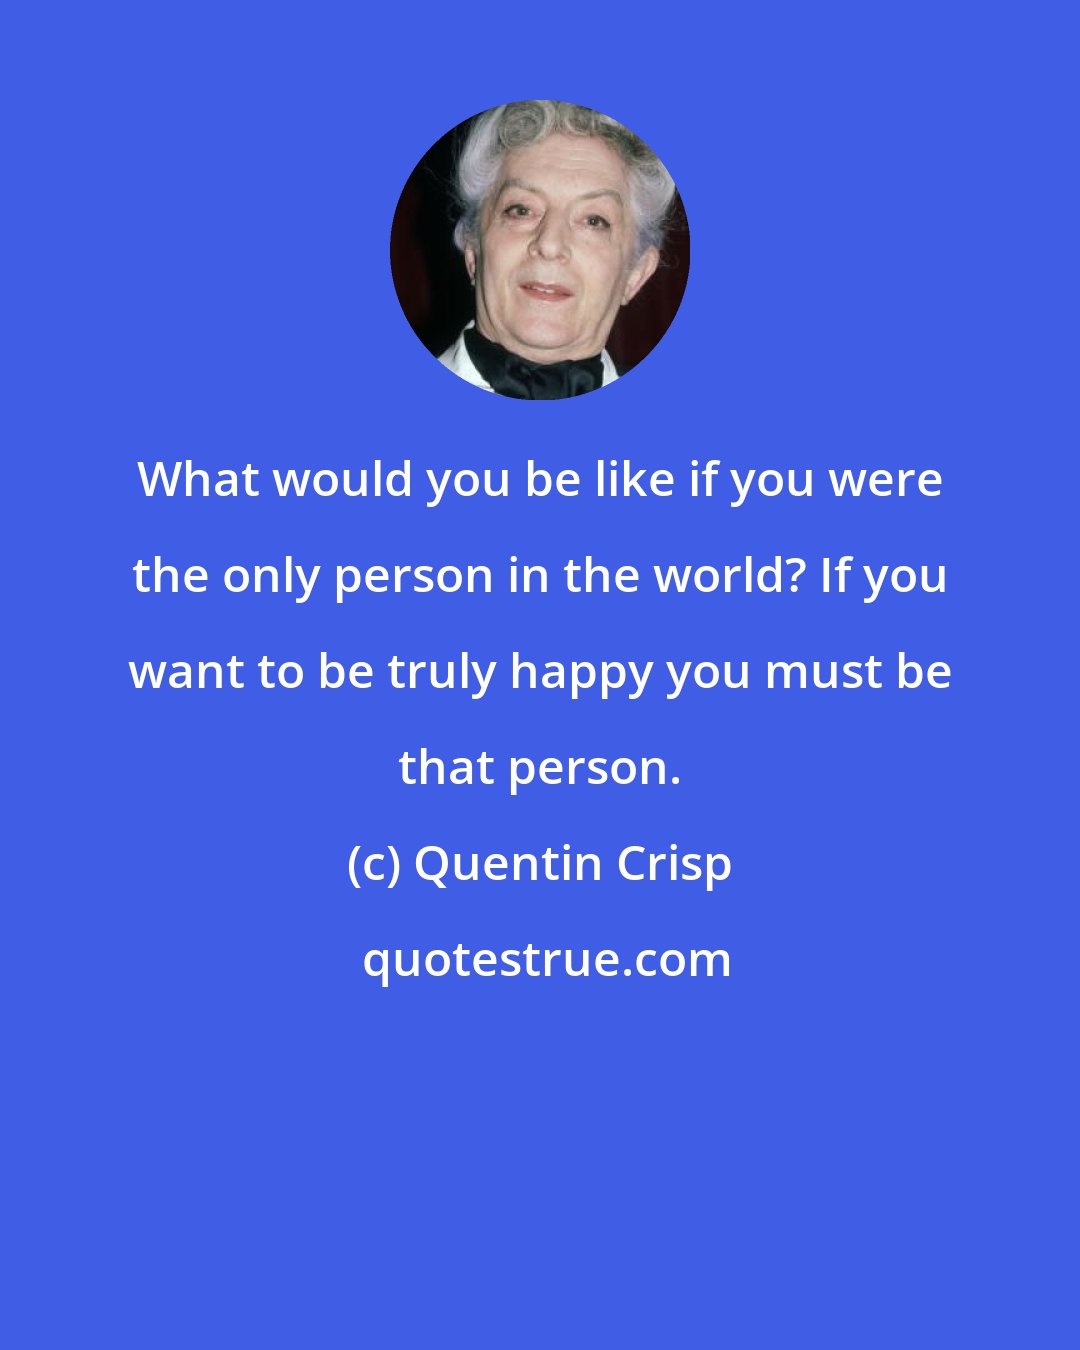 Quentin Crisp: What would you be like if you were the only person in the world? If you want to be truly happy you must be that person.